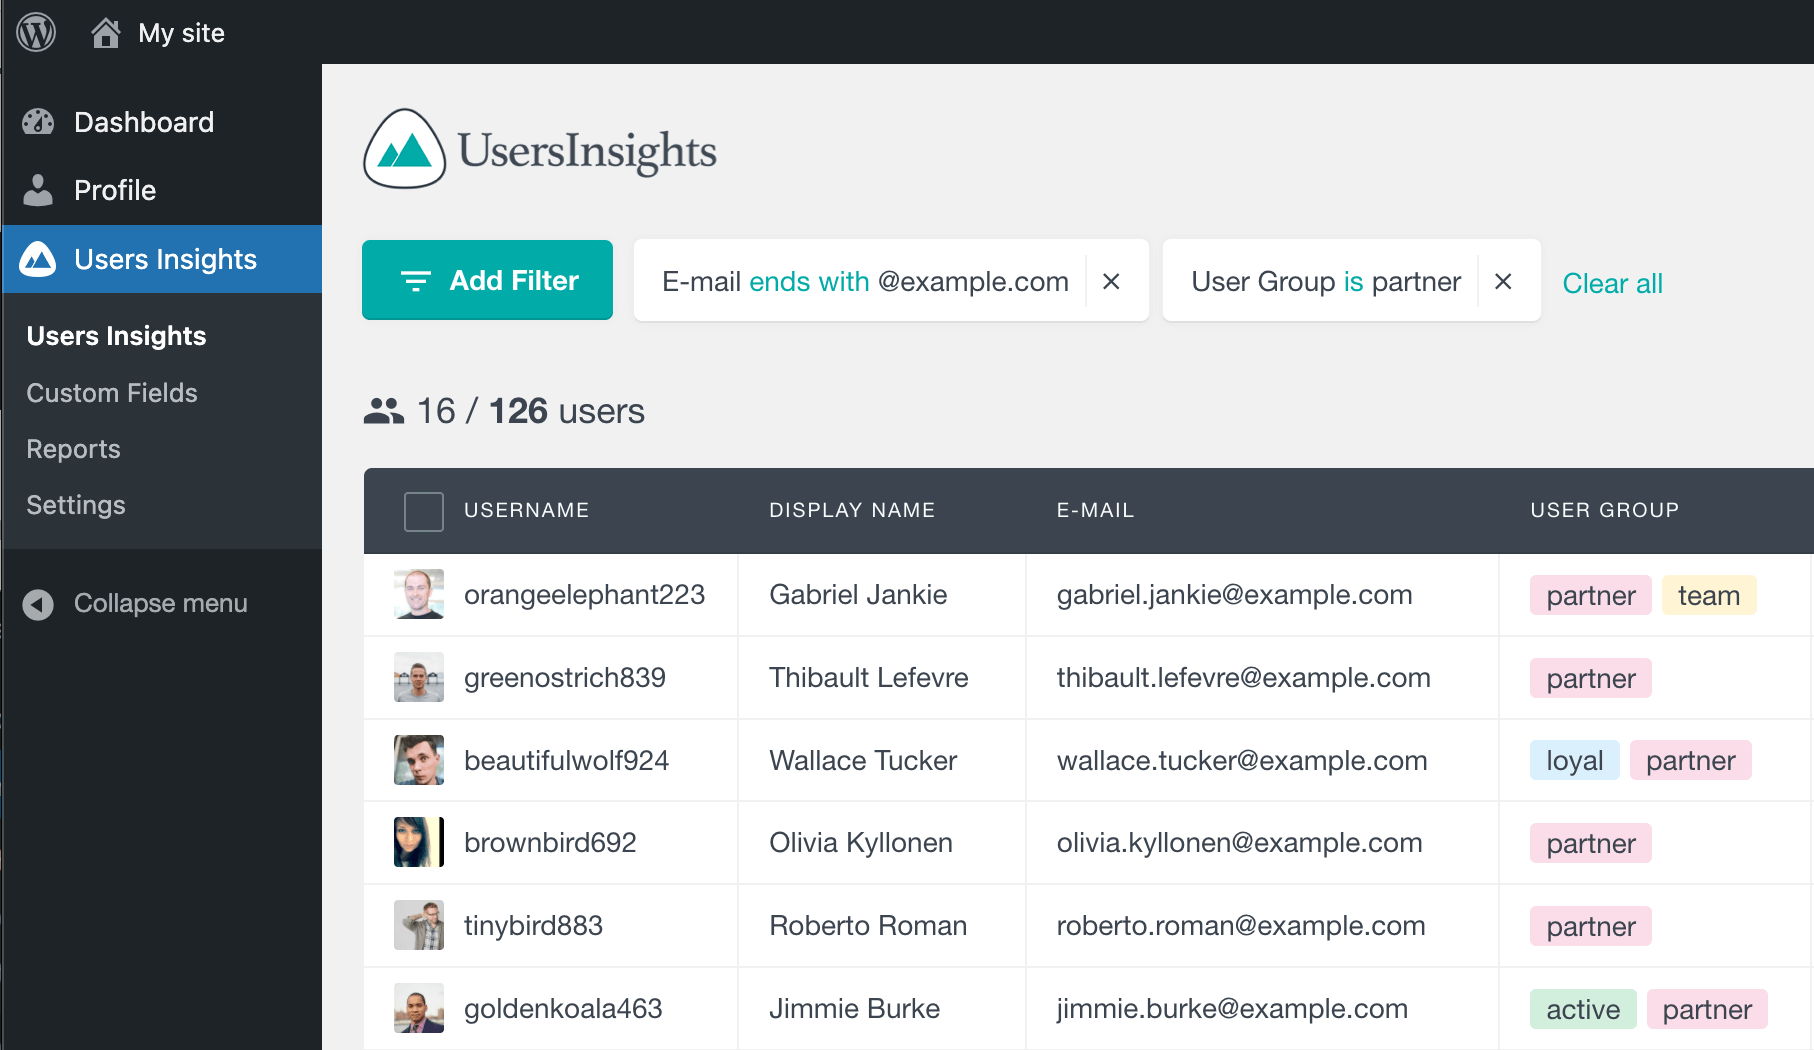 Users Insights filters